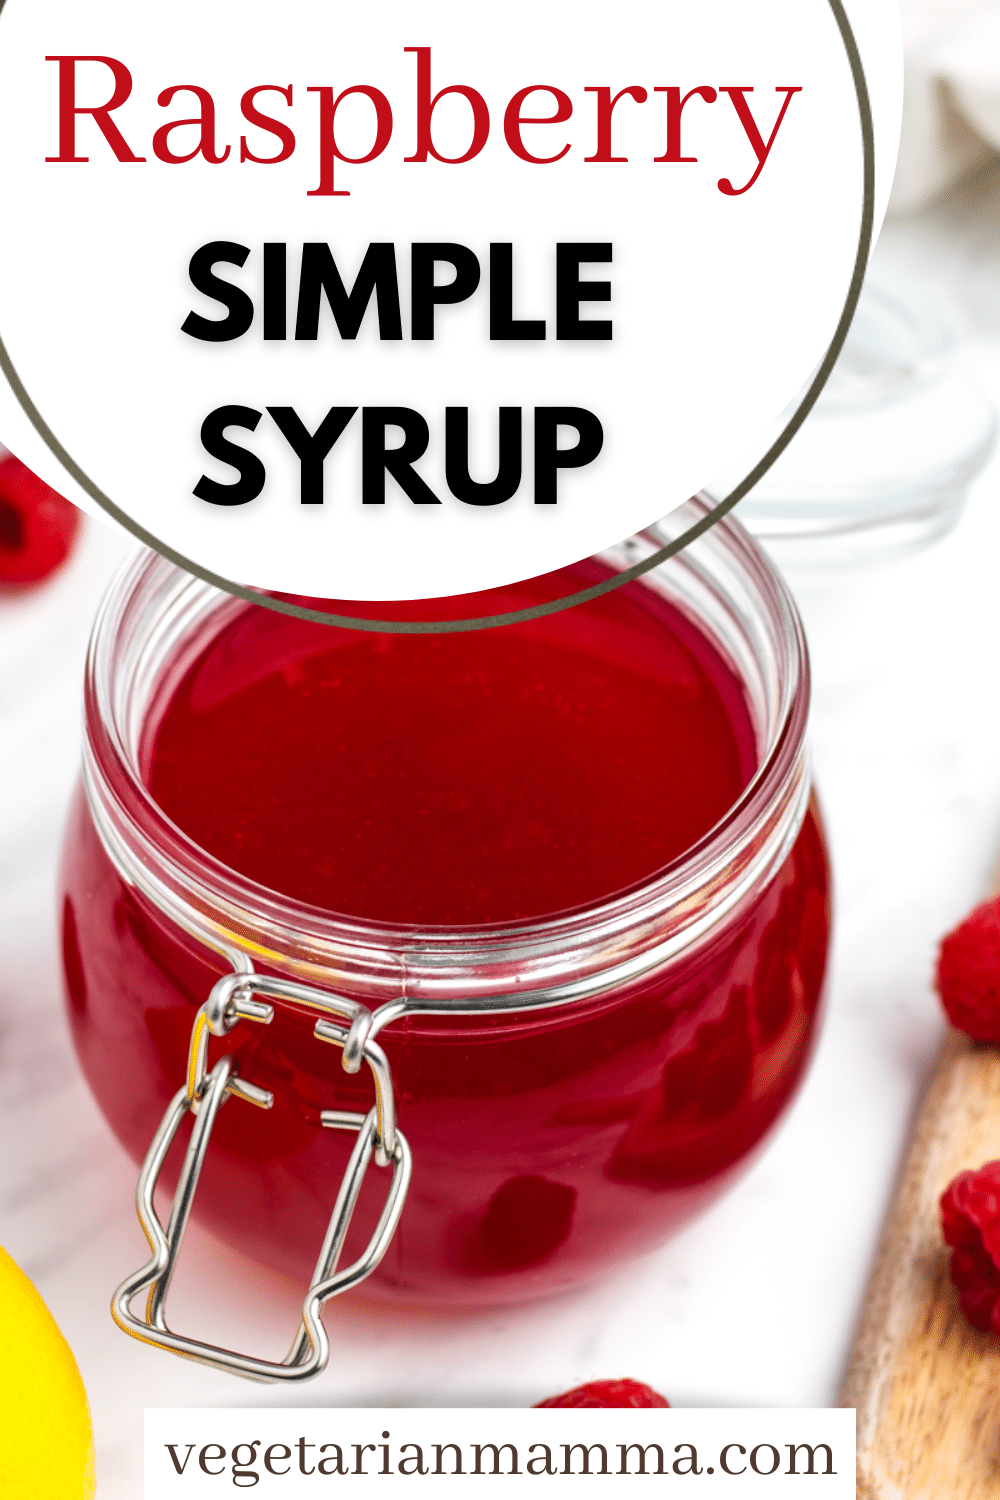 Homemade Raspberry Simple Syrup is made with 4 simple ingredients, and ready in just a few minutes. Pour it over ice cream or add it to ice tea, lemonade, or your favorite cocktails!